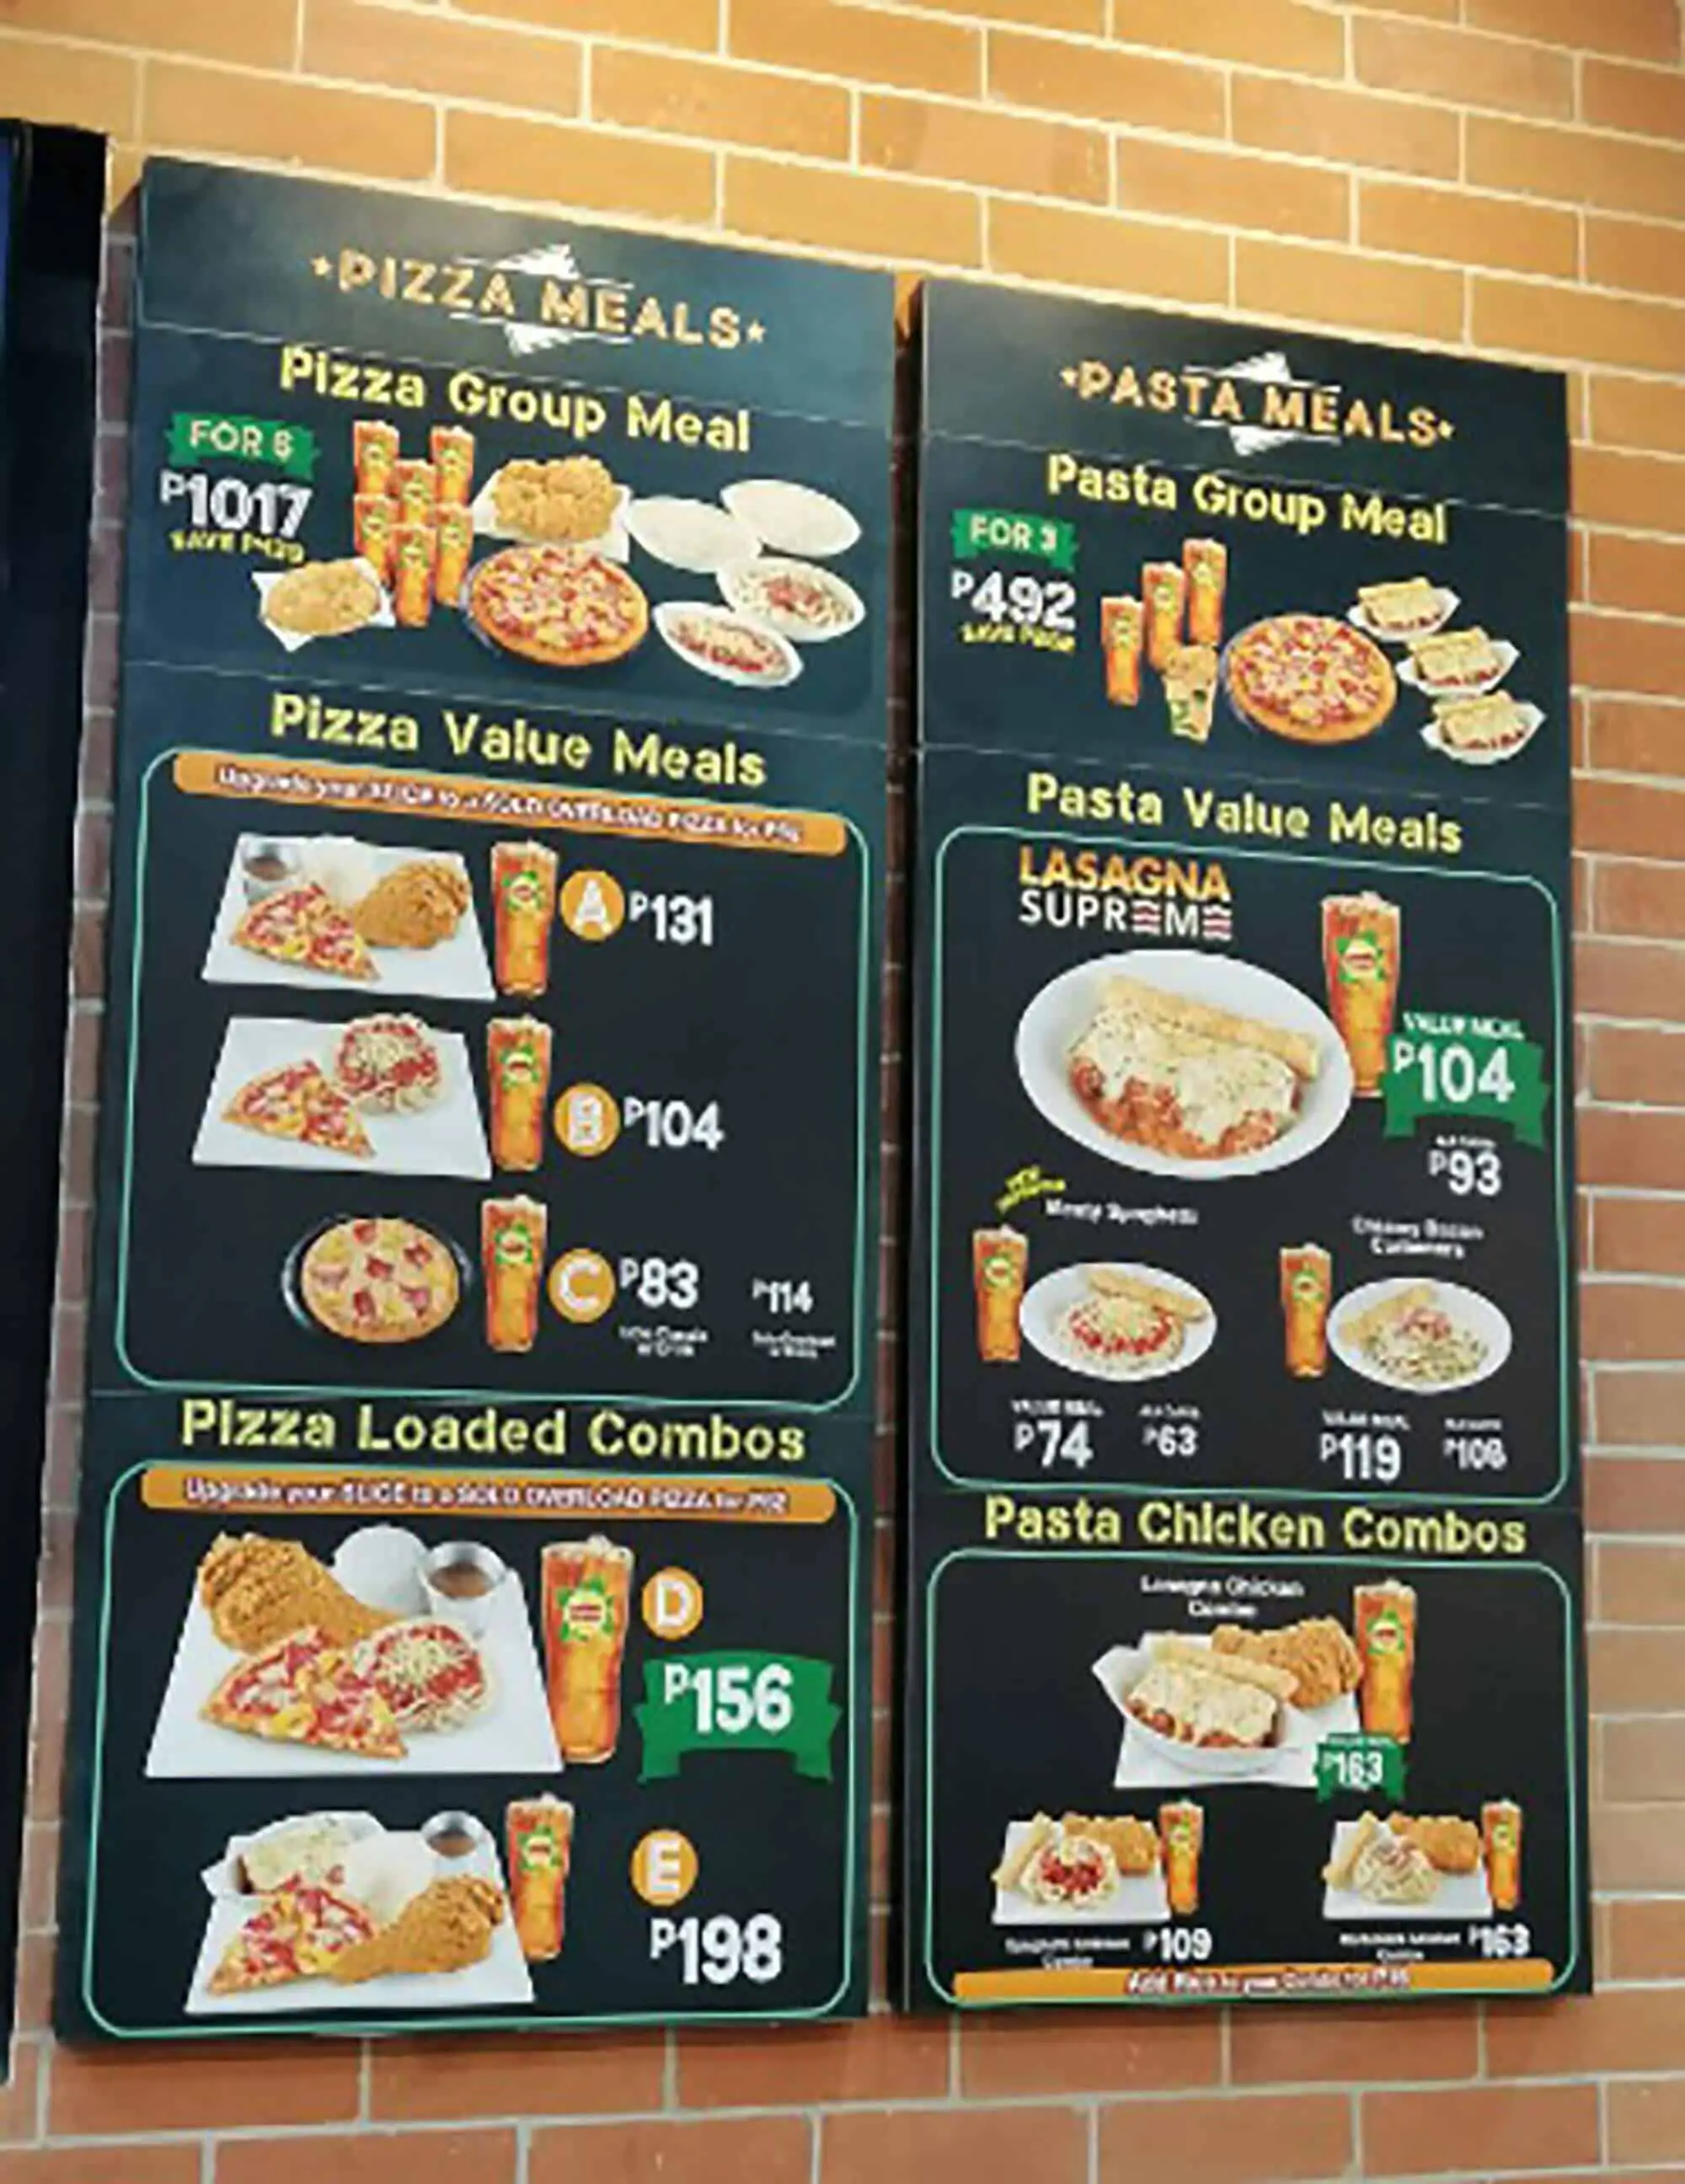 Pizza Meals, Pasta Chicken Combos, And Value Meals Greenwich Menu